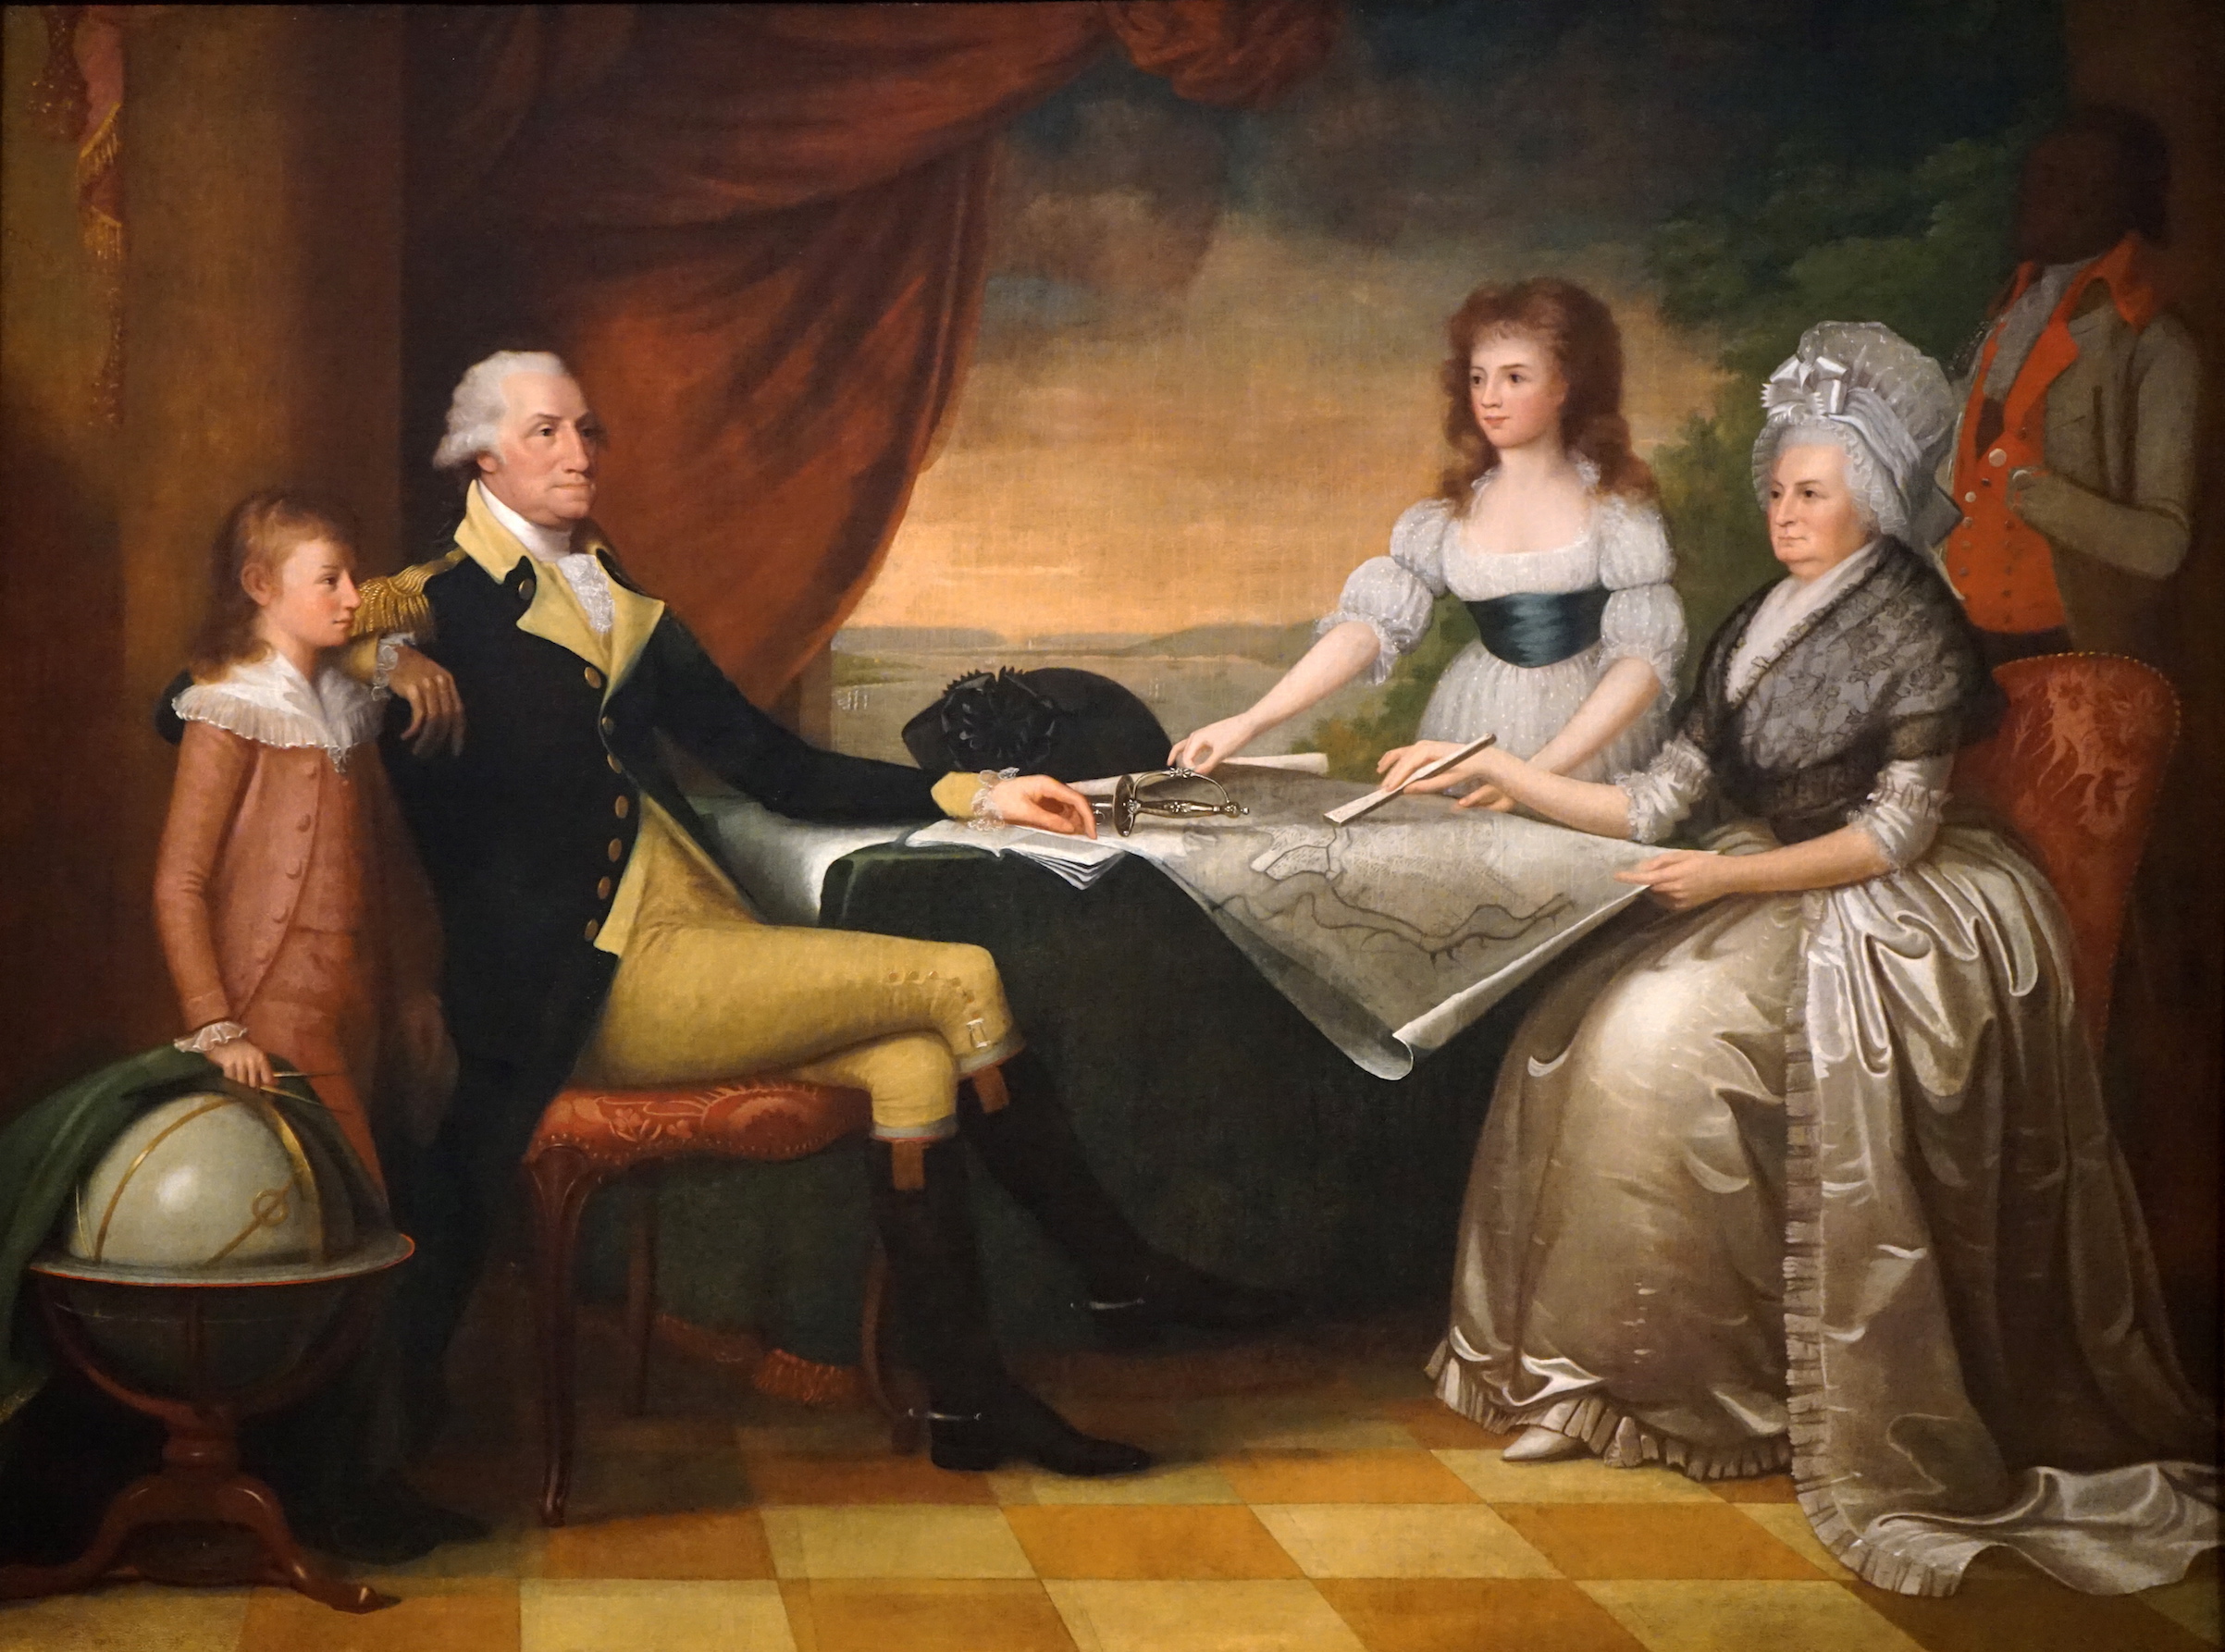 Portrait of George Washington (1732-1799) the 1st President of the United States of America, with Martha Washington and his family. Painted by Edward Savage (1761-1817) an American painter and engraver. Dated 18th Century. (Universal History Archive/Getty Images)